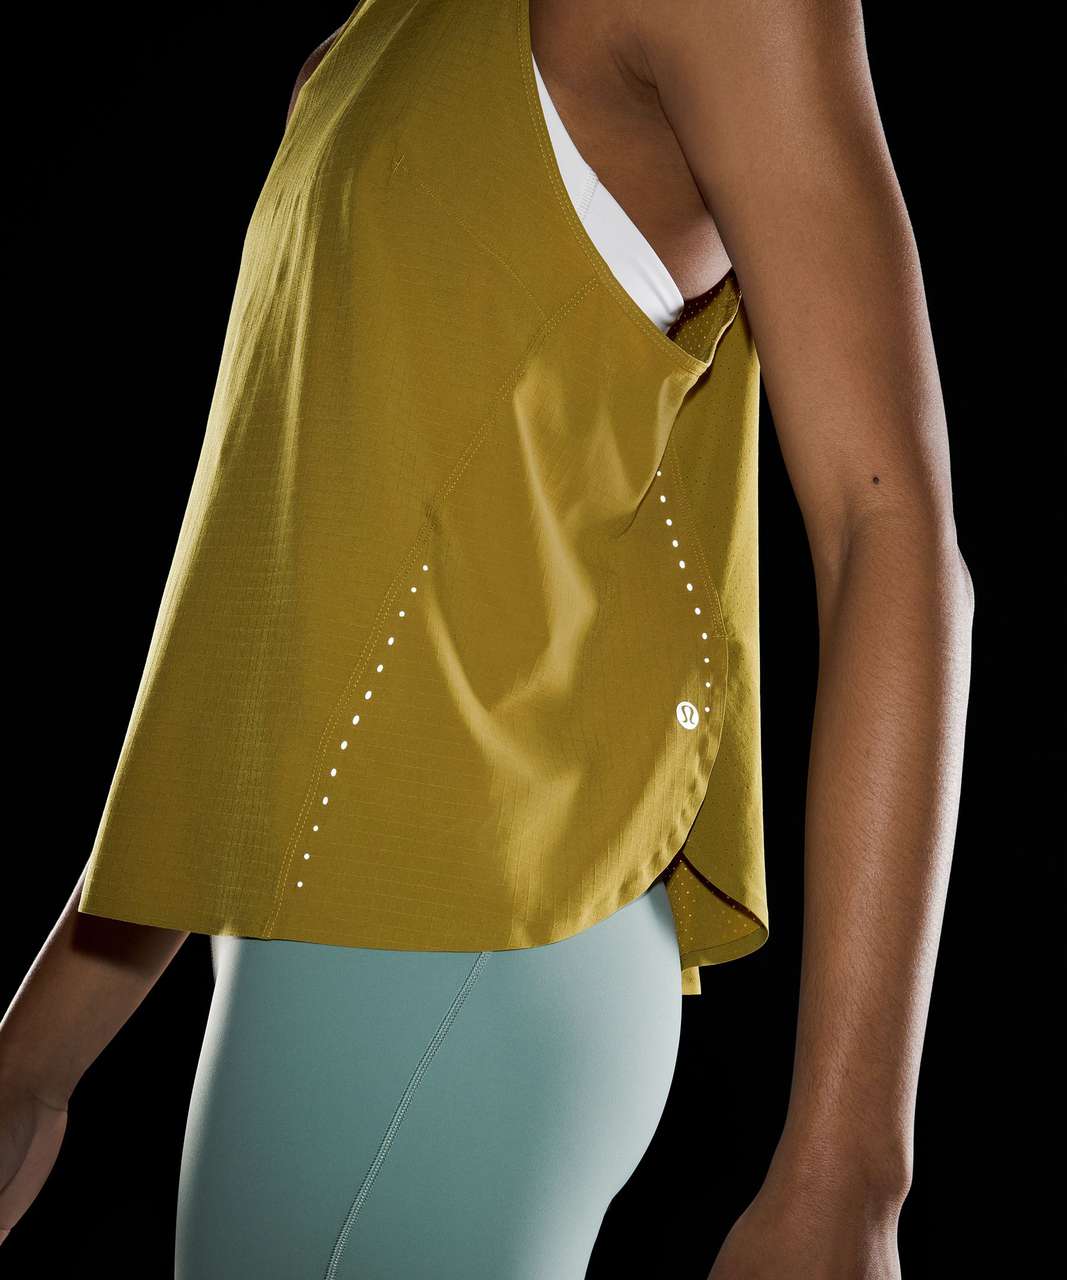 Run for the Bling Tank Top: YELLOW